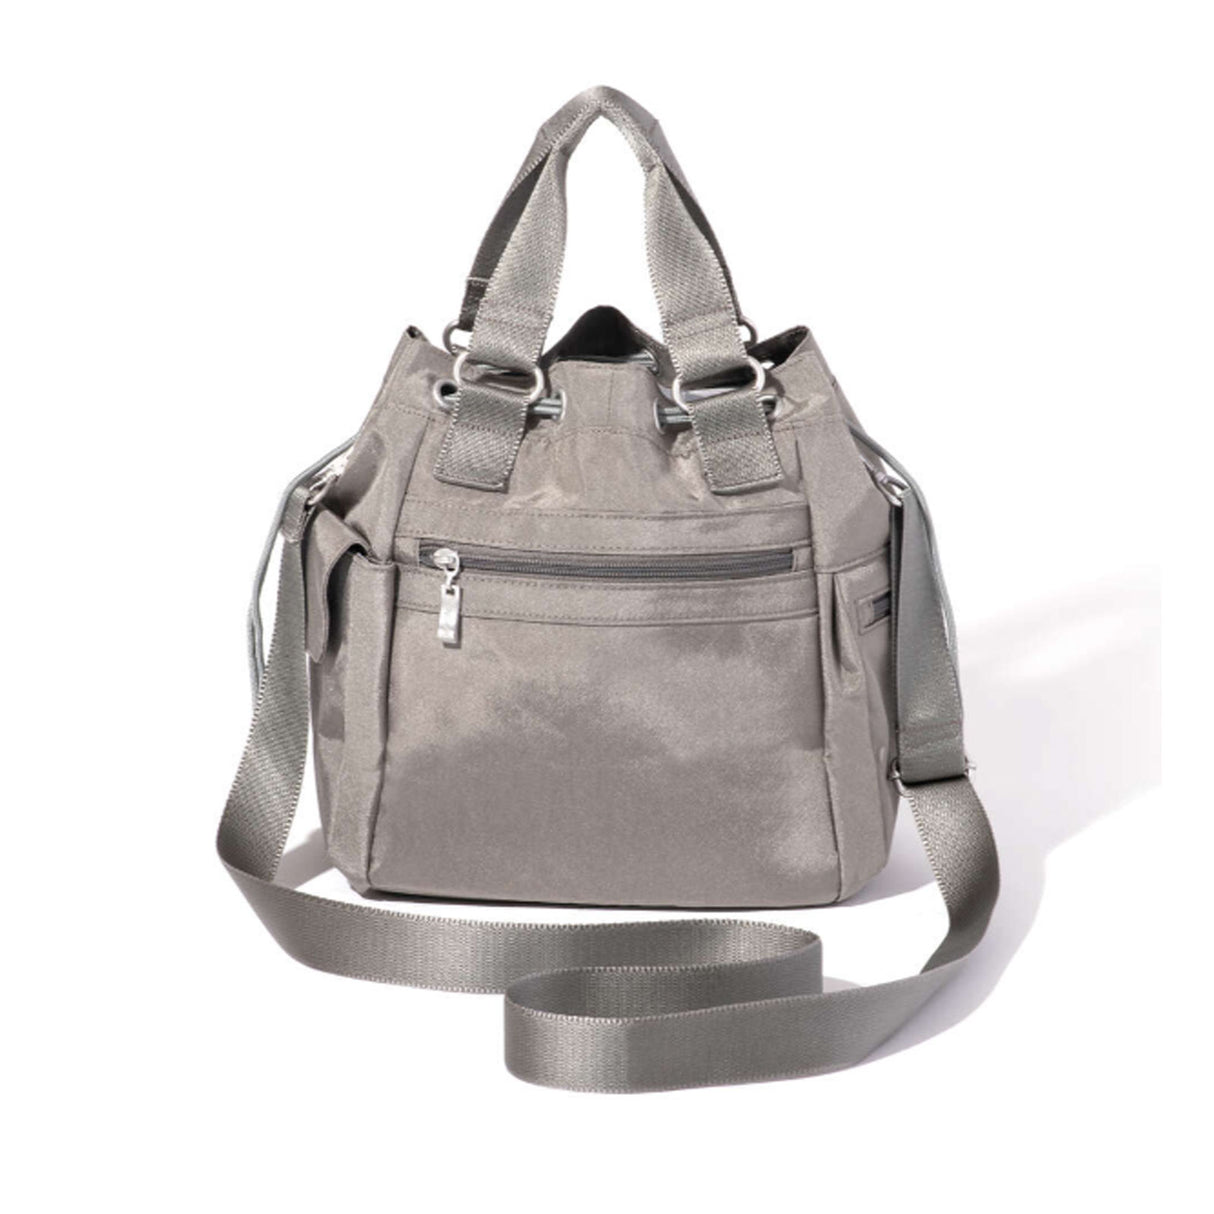 Baggallini Modern Everywhere Drawstring Bag - Sterling Shimmer Accessories - Bags - Purses - The Heel Shoe Fitters